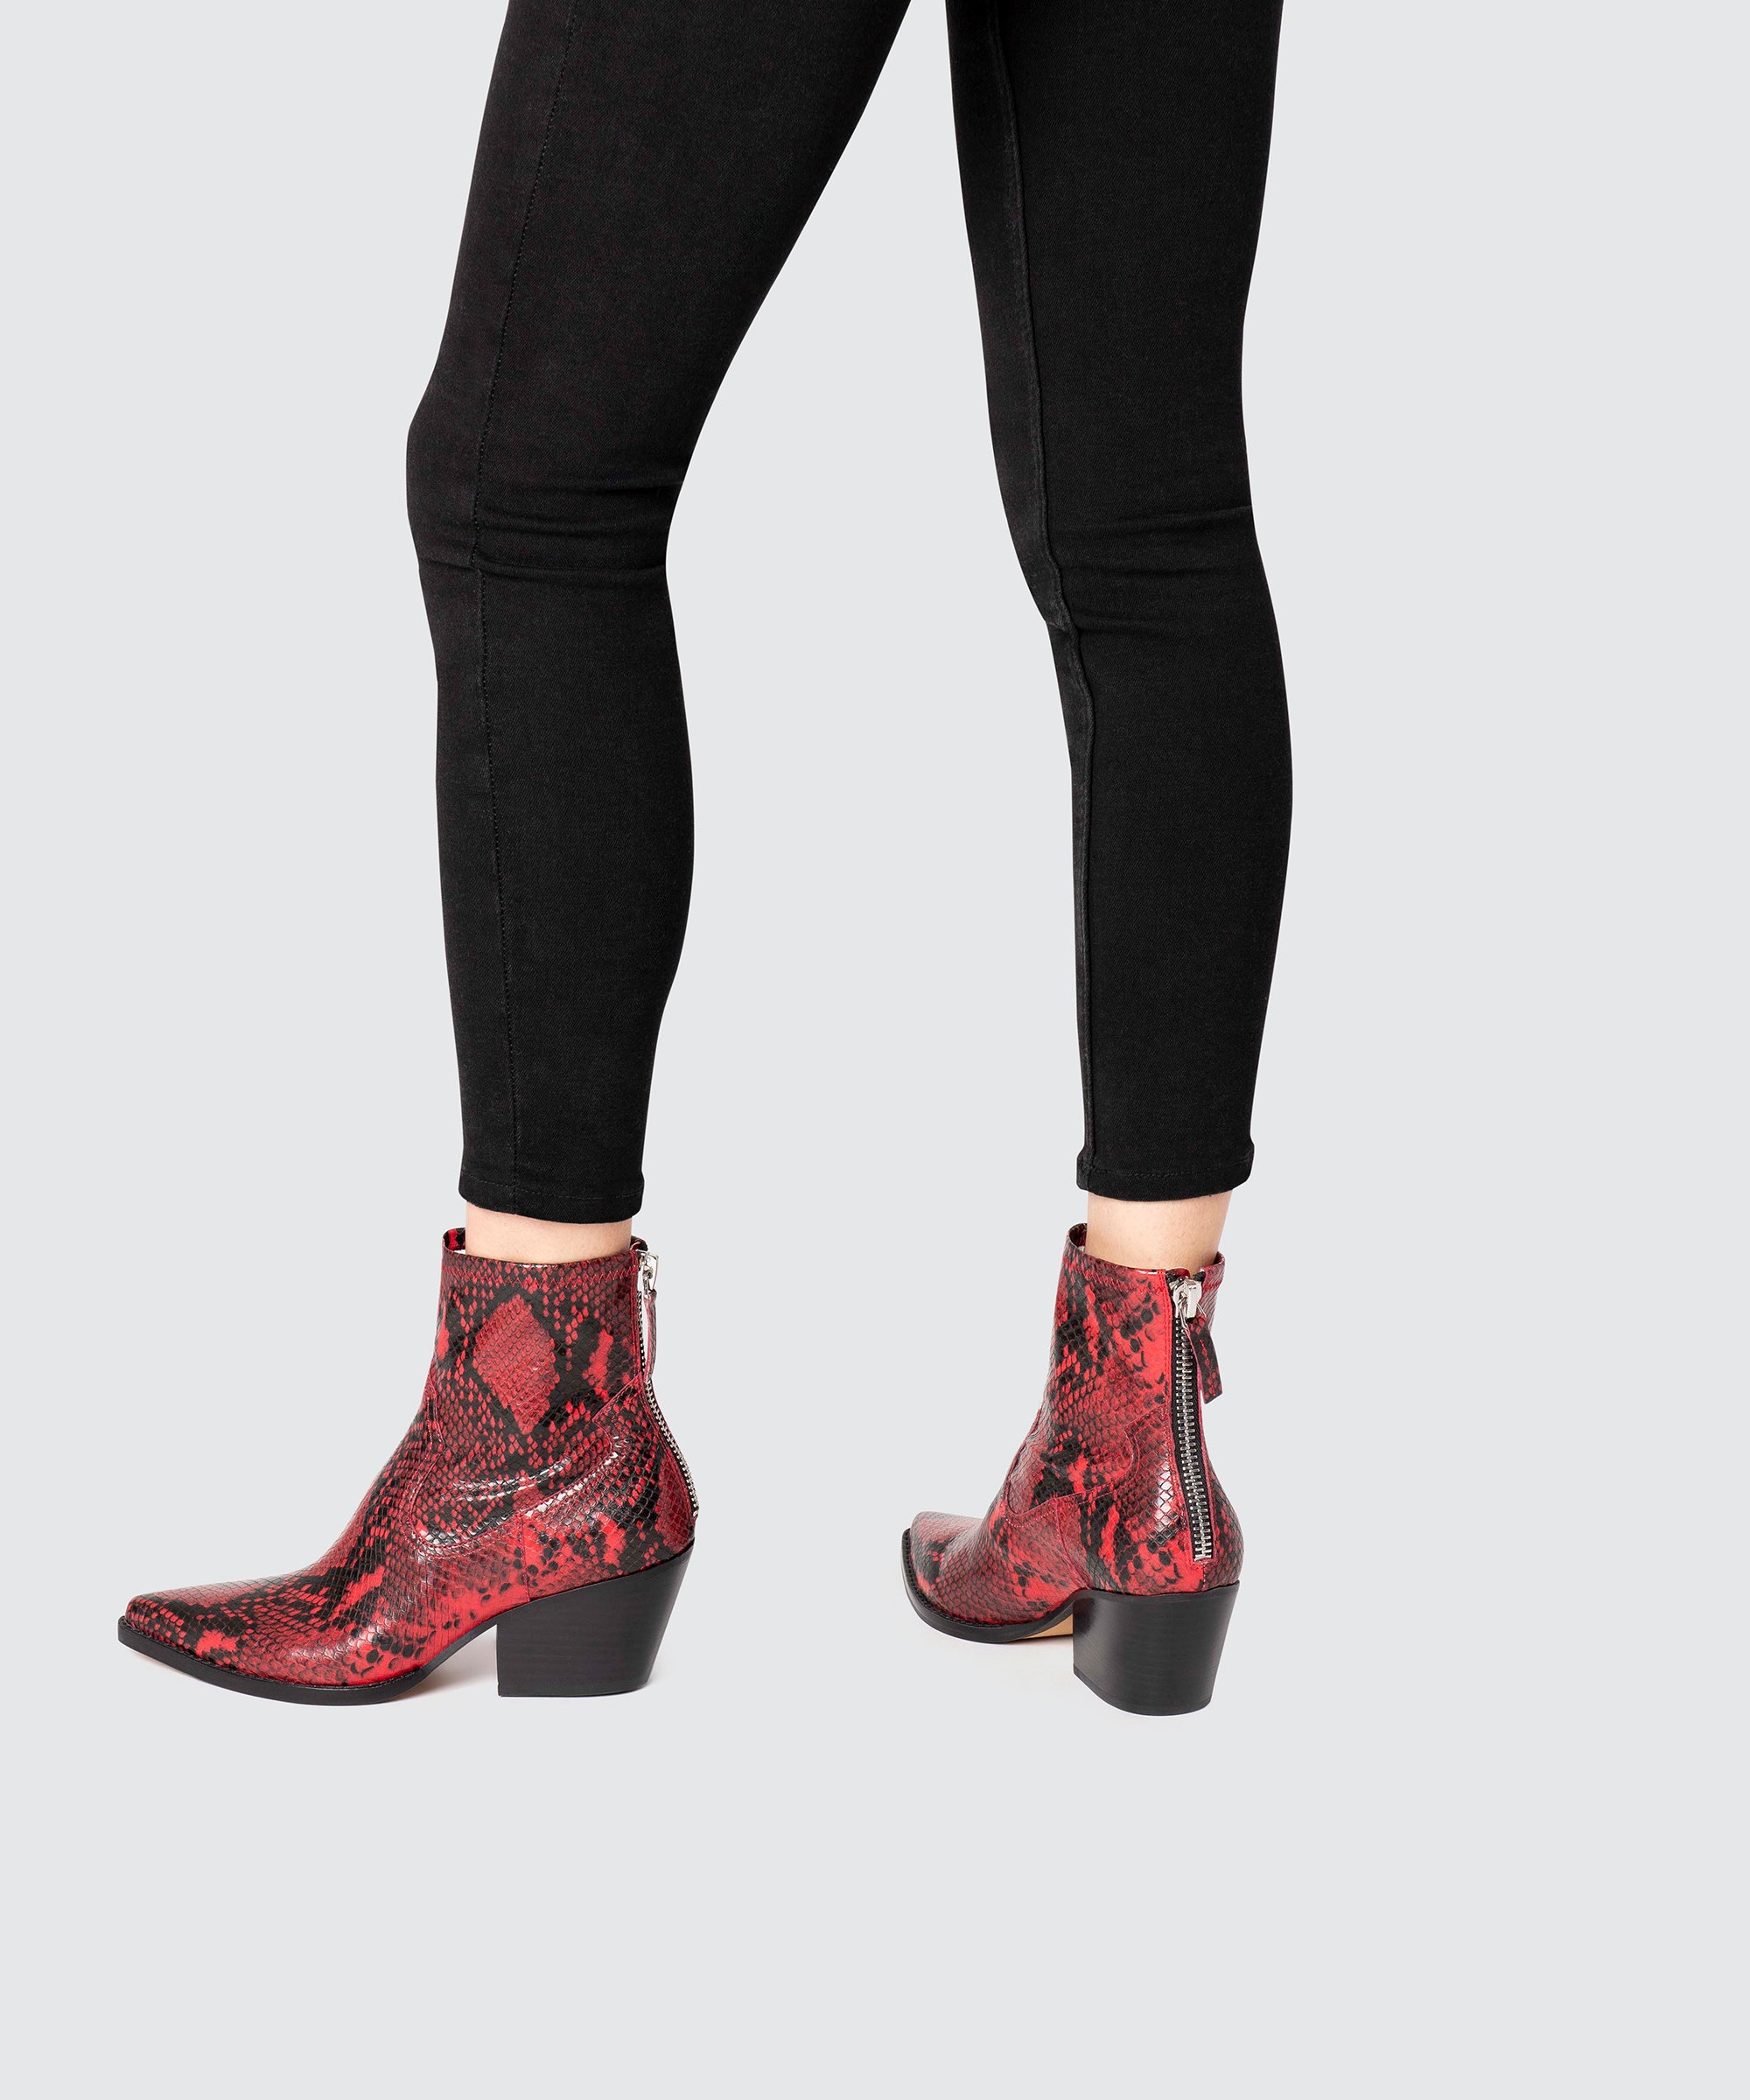 dolce vita red booties